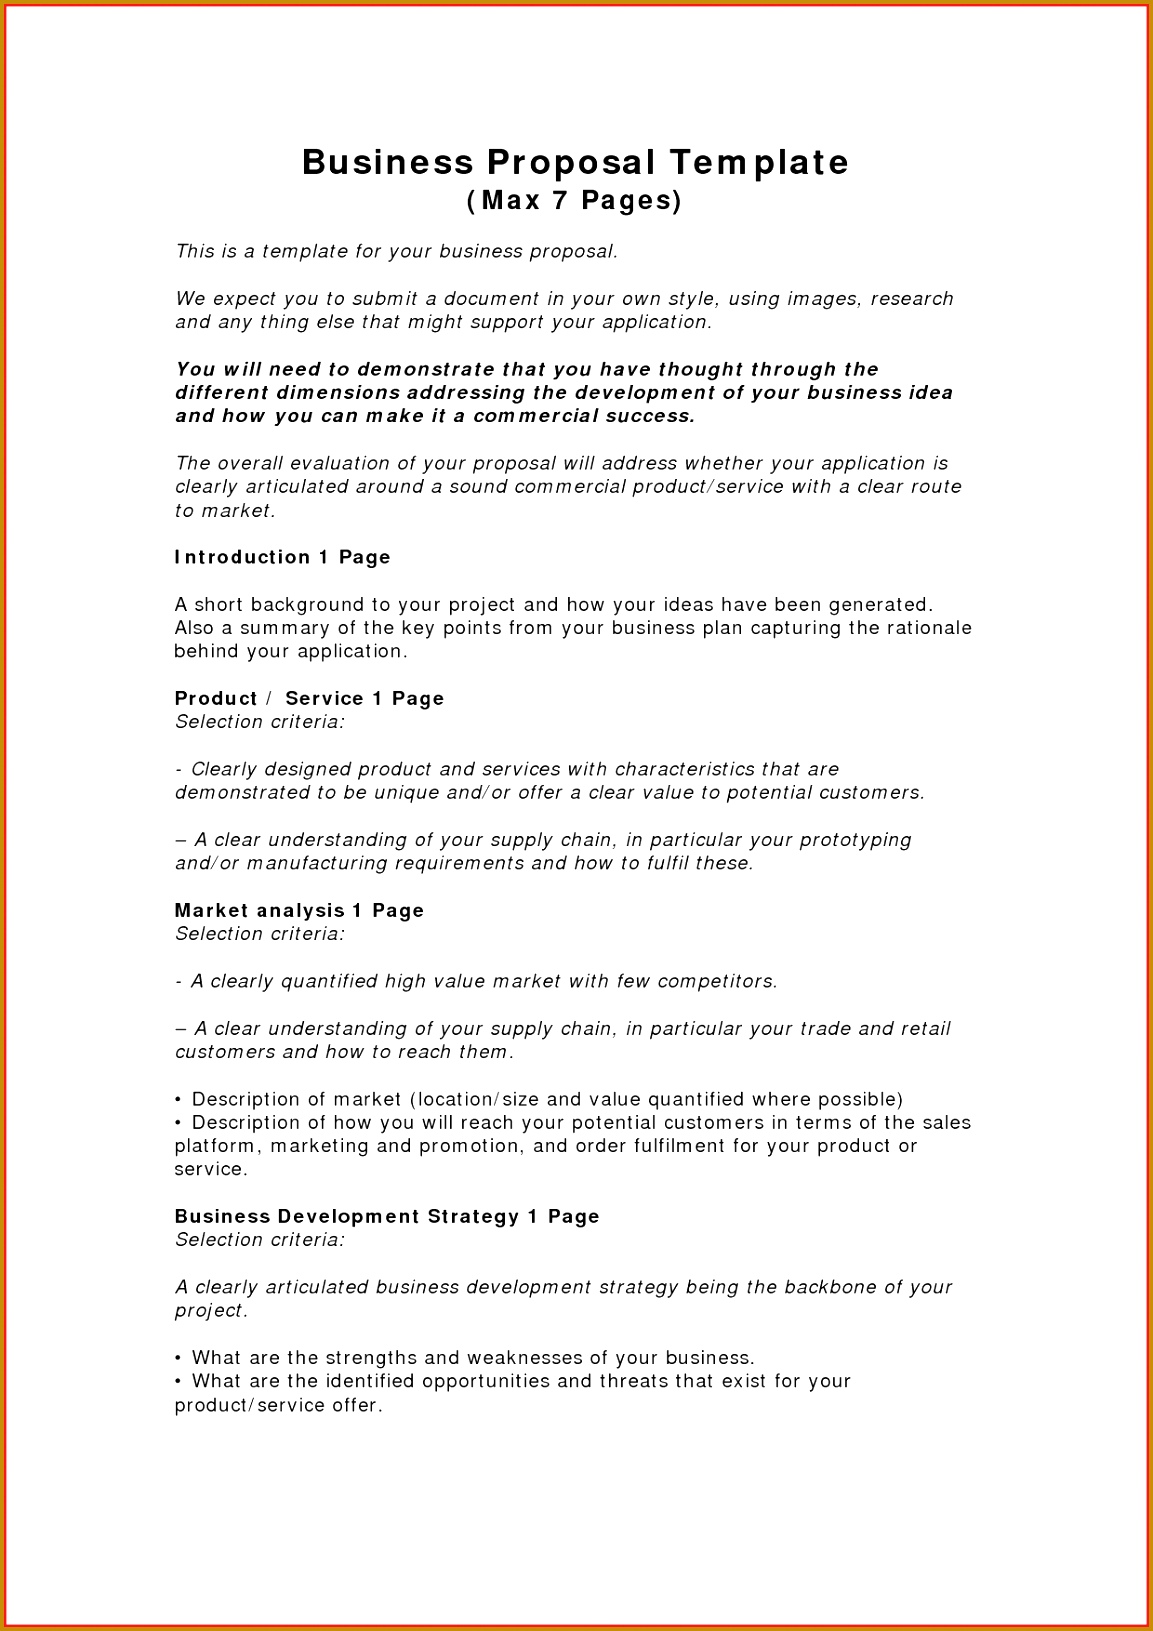 strategic proposal template how to write business proposal letter gallery letter format examples 16311153